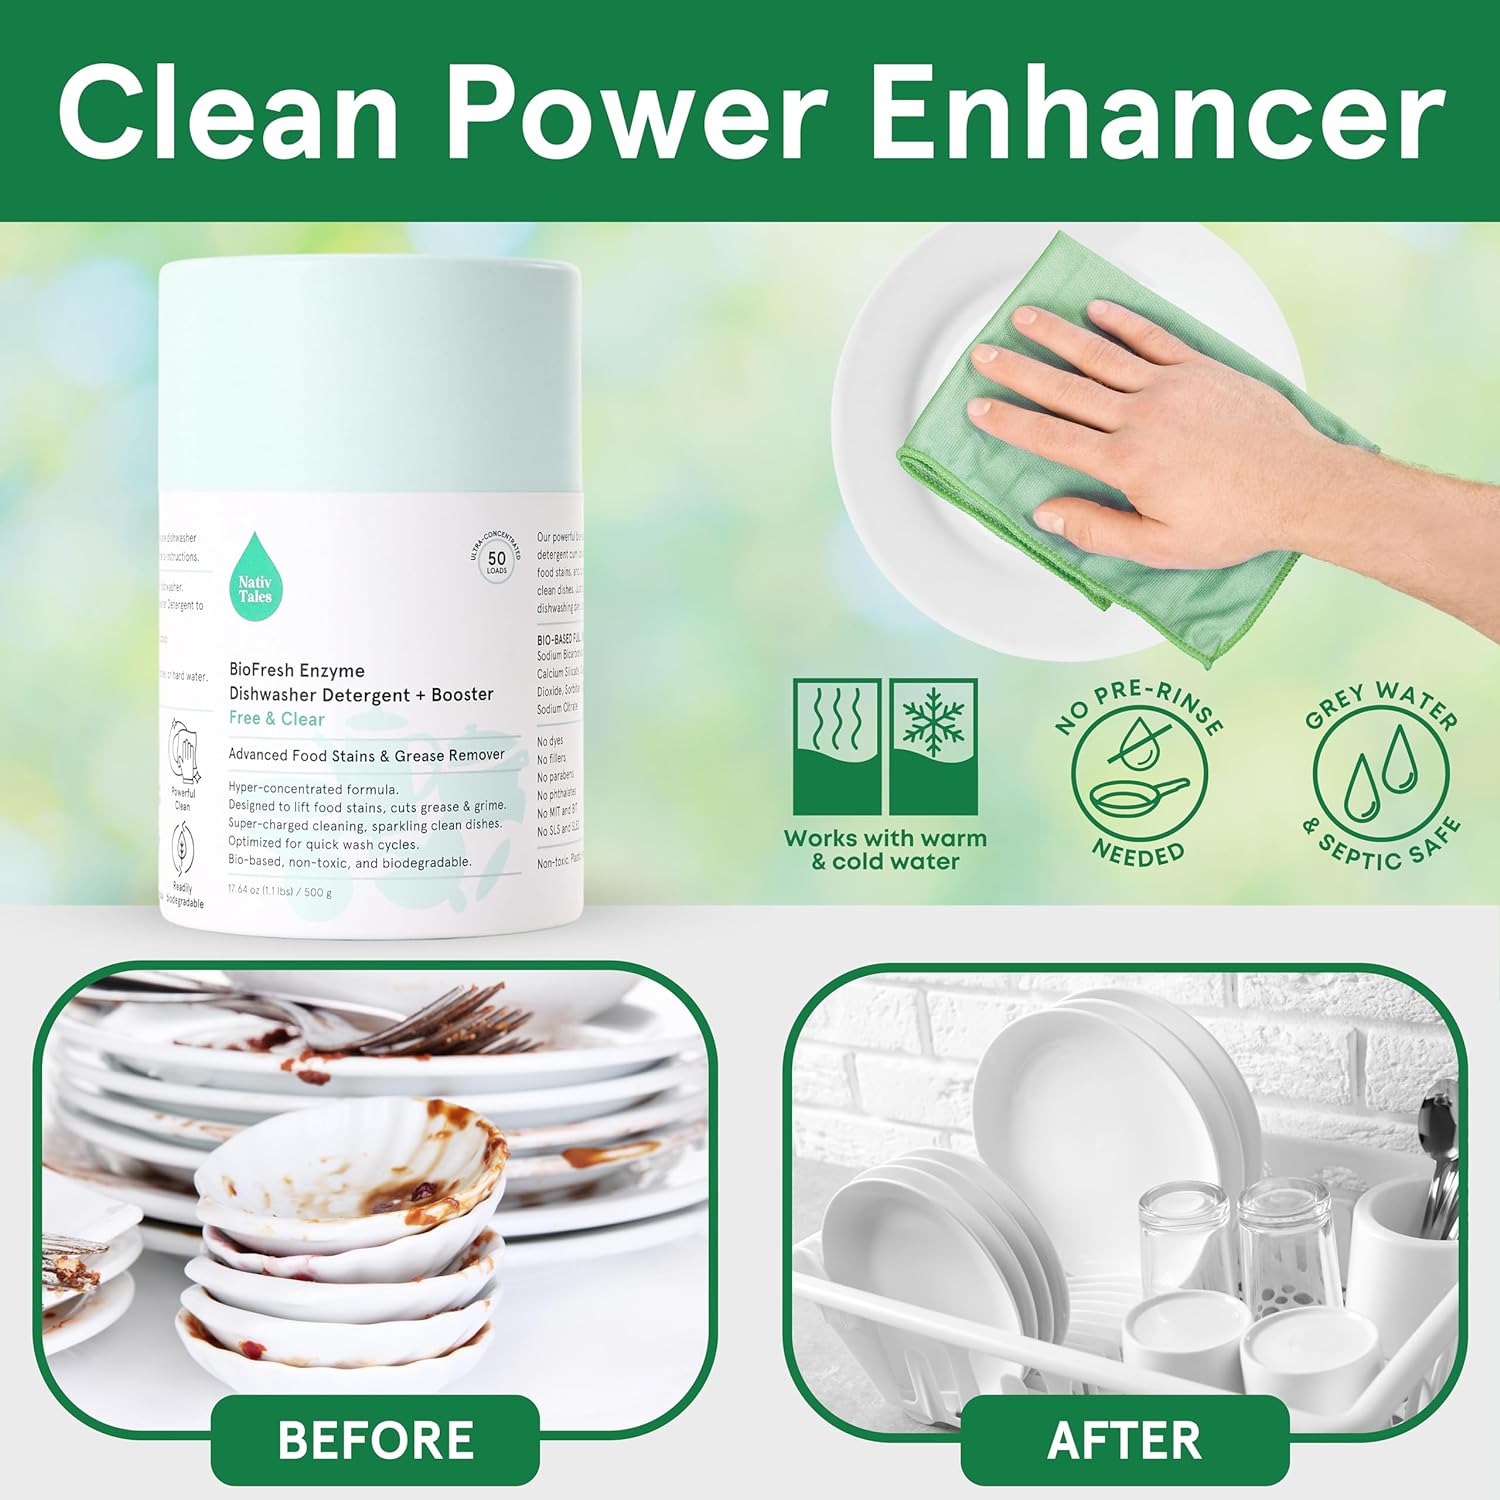 Dishwasher Detergent Powder and Booster, Dishwashing Detergent Powder Ultra Clean, Spot Free, Quick Wash Optimized Dish Washing Powder, Hyper Concentrated, High-Efficiency Dishwashing Solution : Health & Household